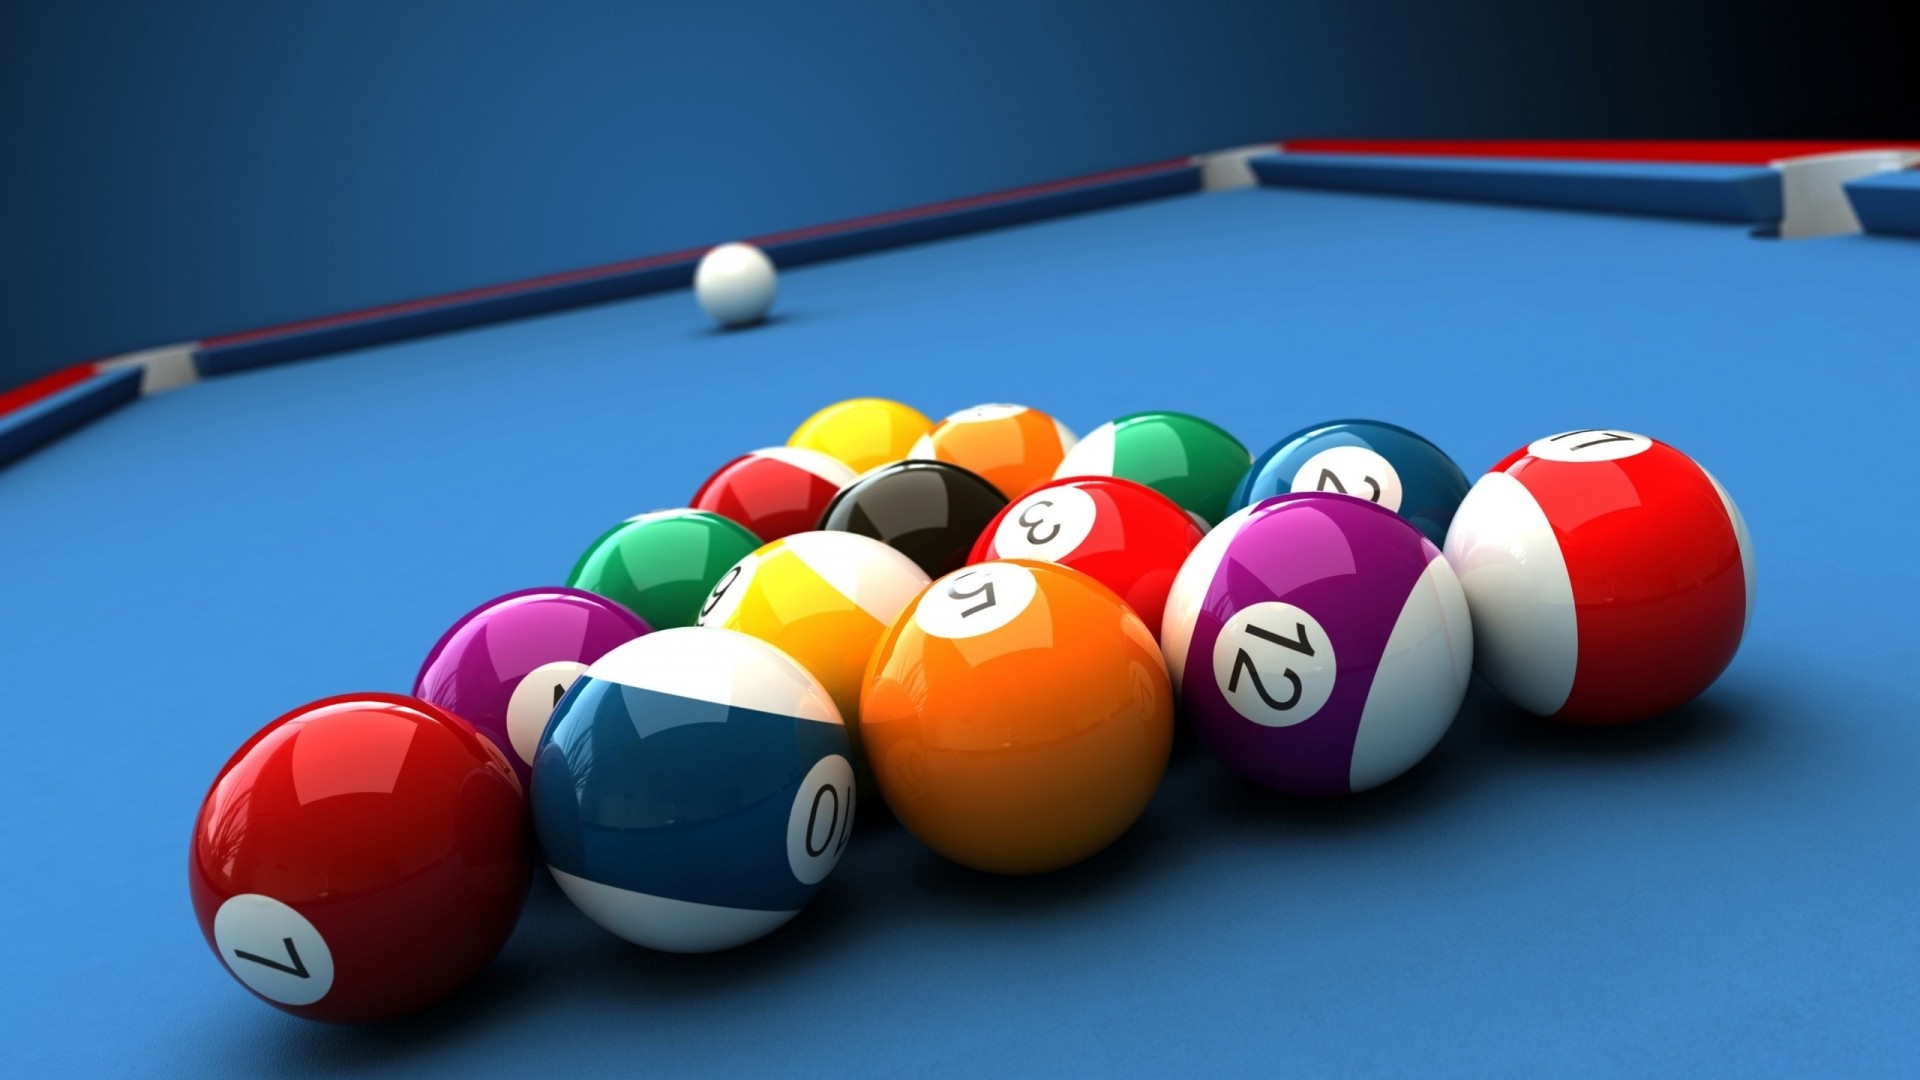 General 1920x1080 ball numbers billiards billiard balls colorful blue background pool table